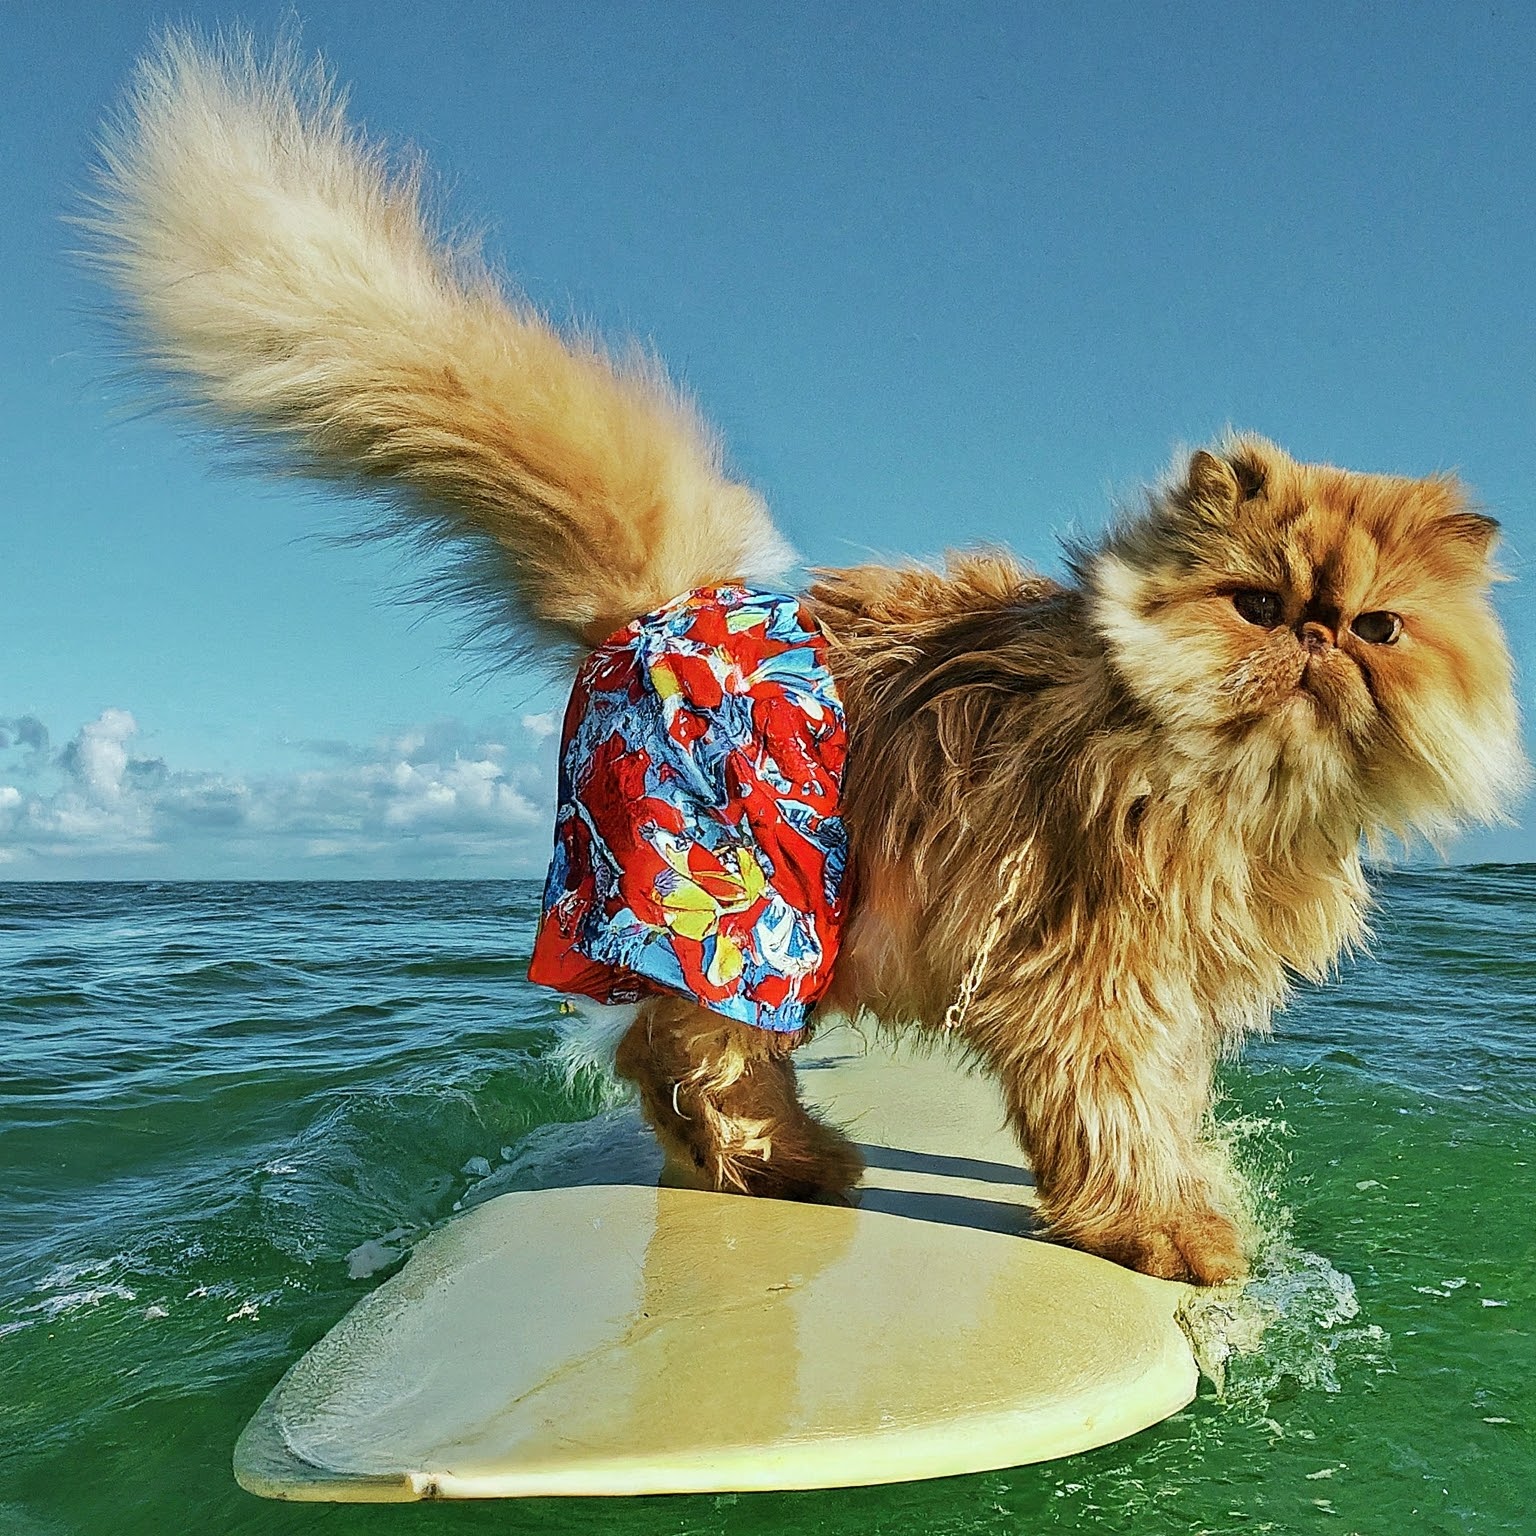 A Cat On A Surfboard In The Ocean, Wearing Shorts And Surfing The Waves.